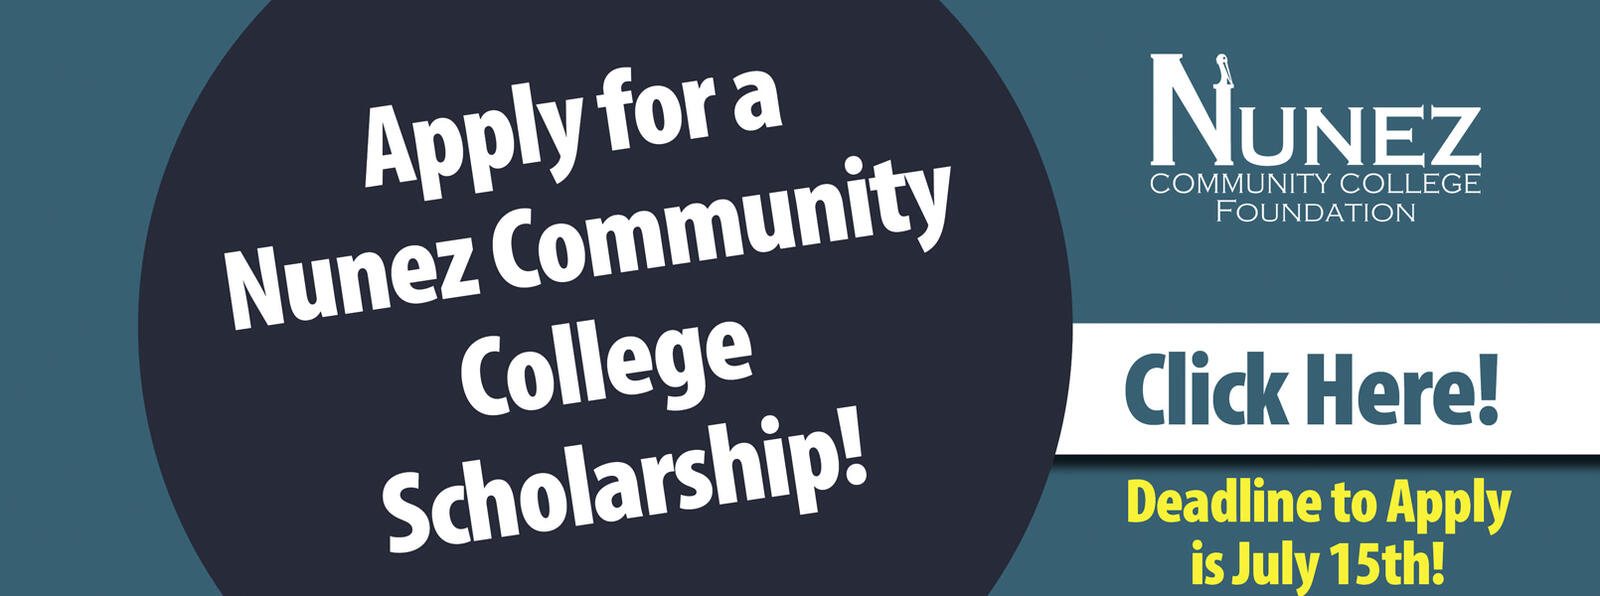 Apply for a Nunez Scholarship - Deadline is July 15th - Click Here!